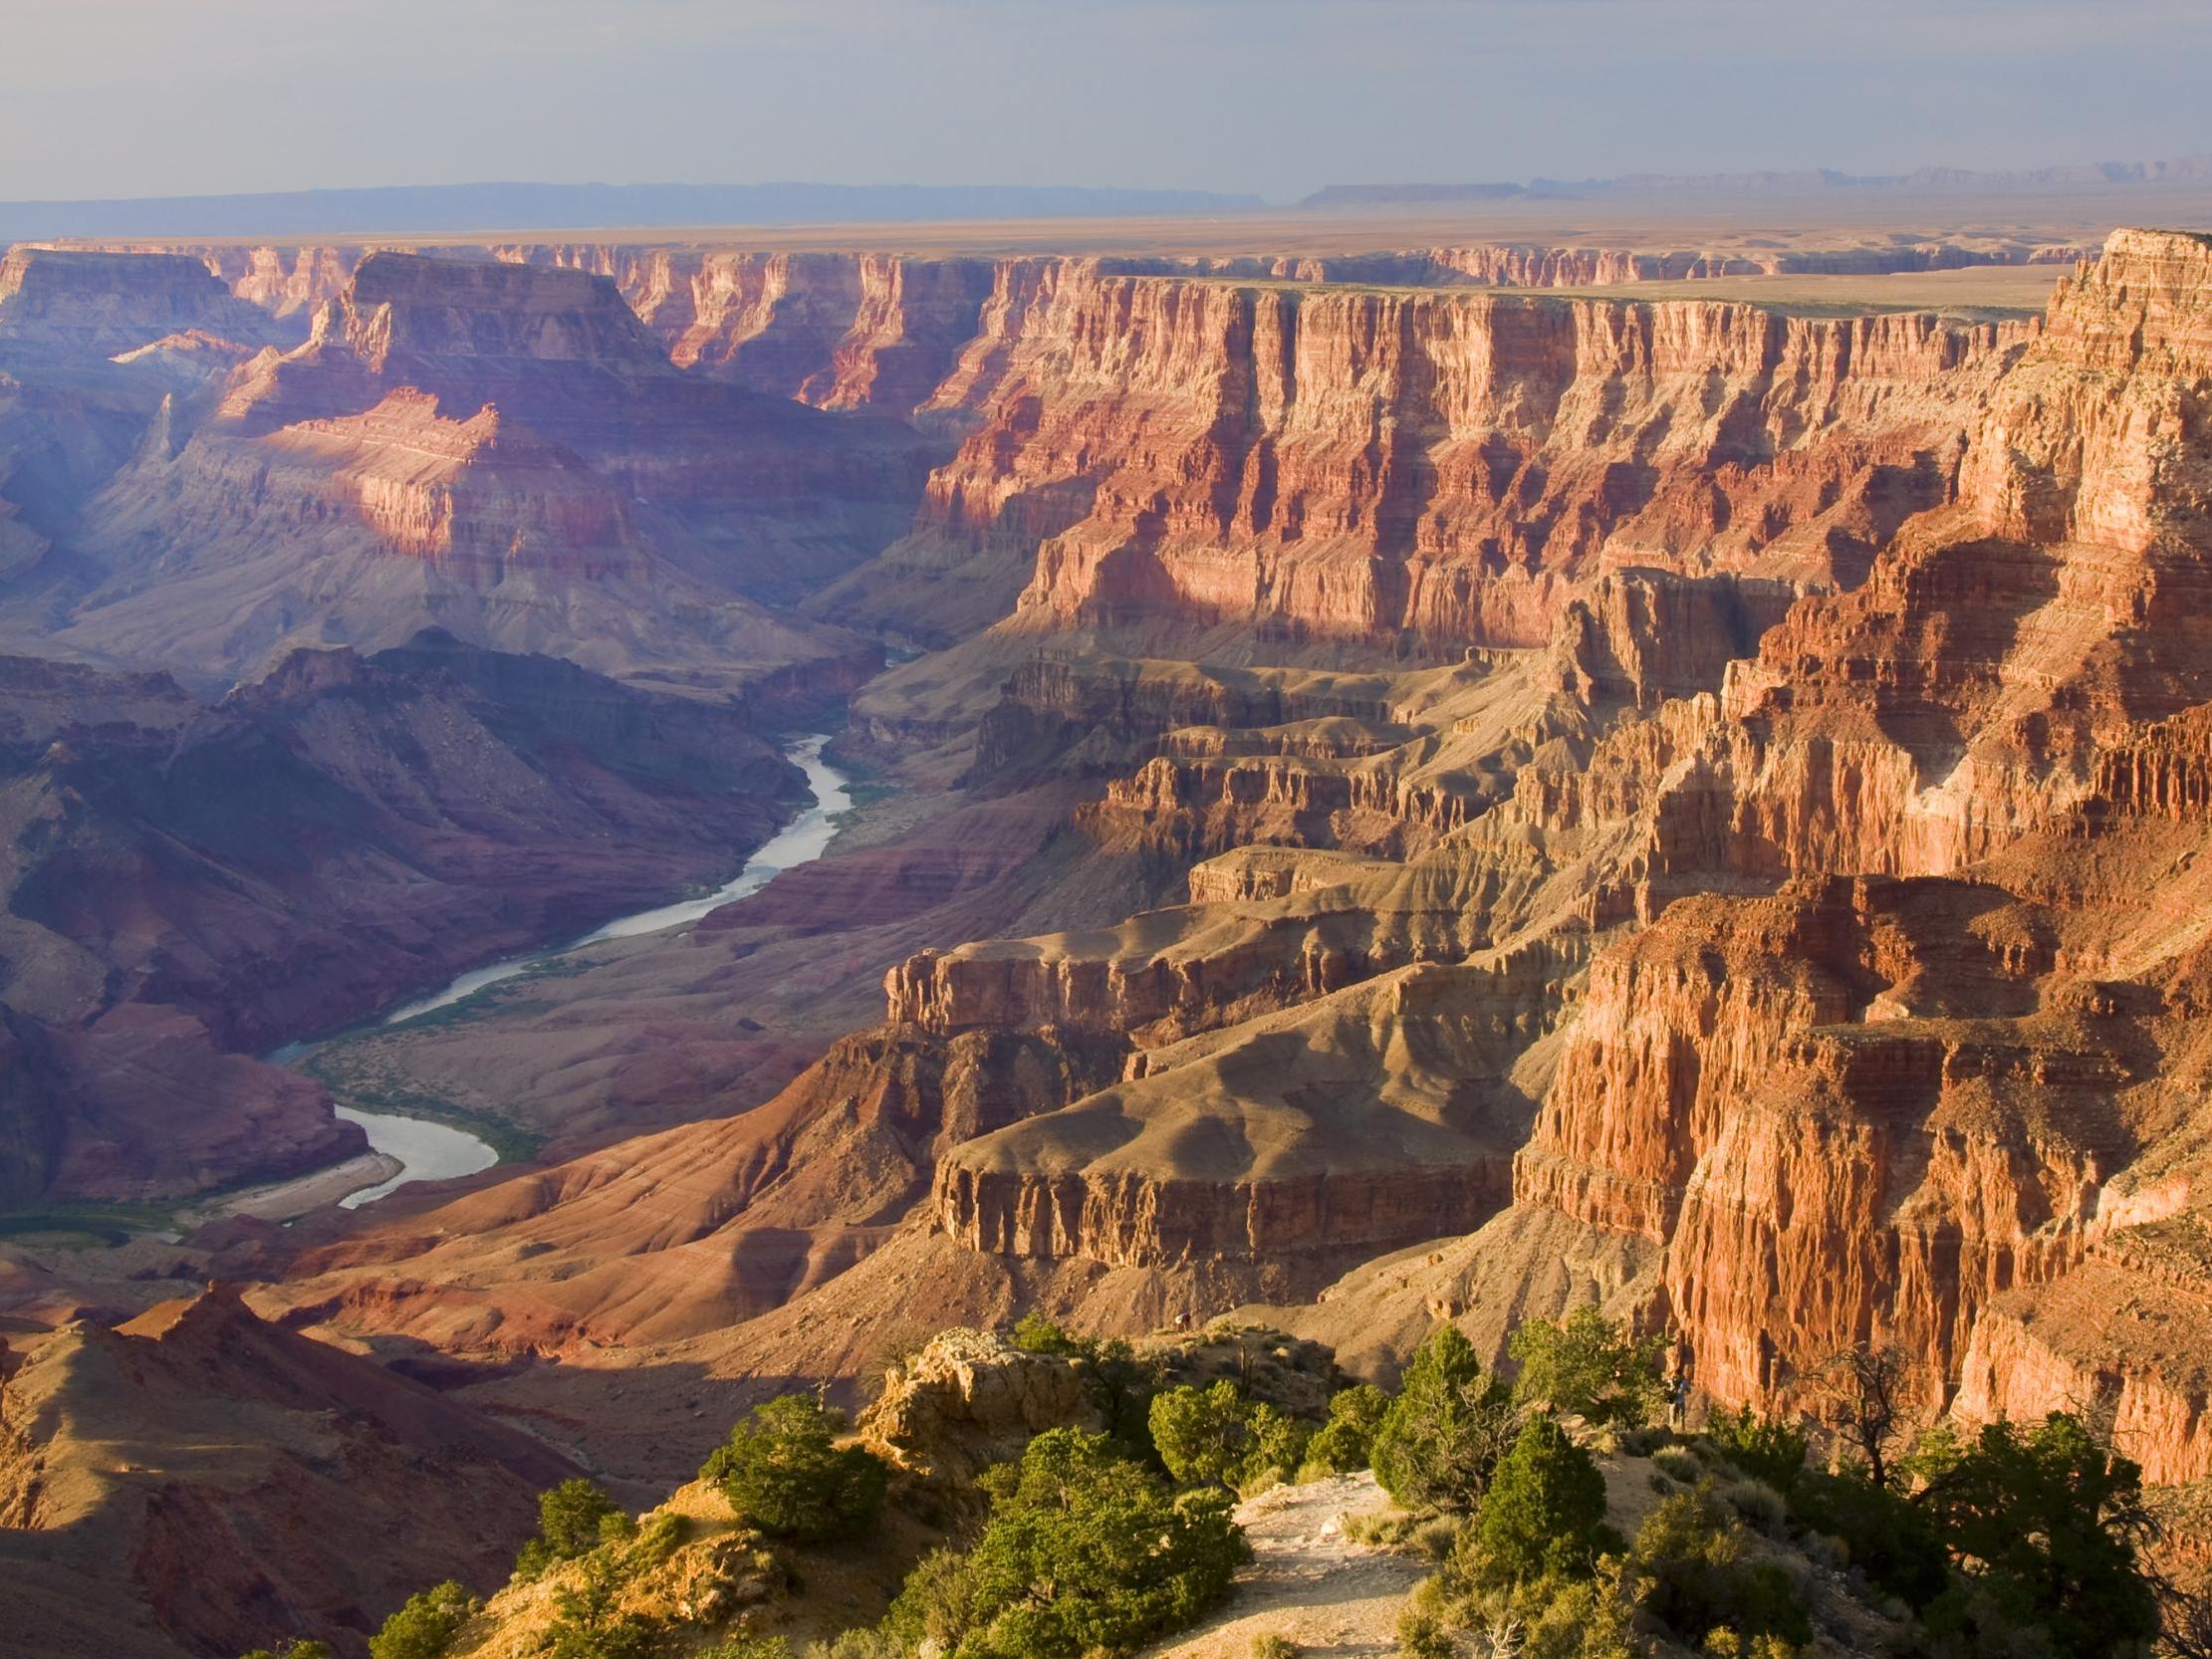 Stock image of the Grand Canyon, in Arizona, US.